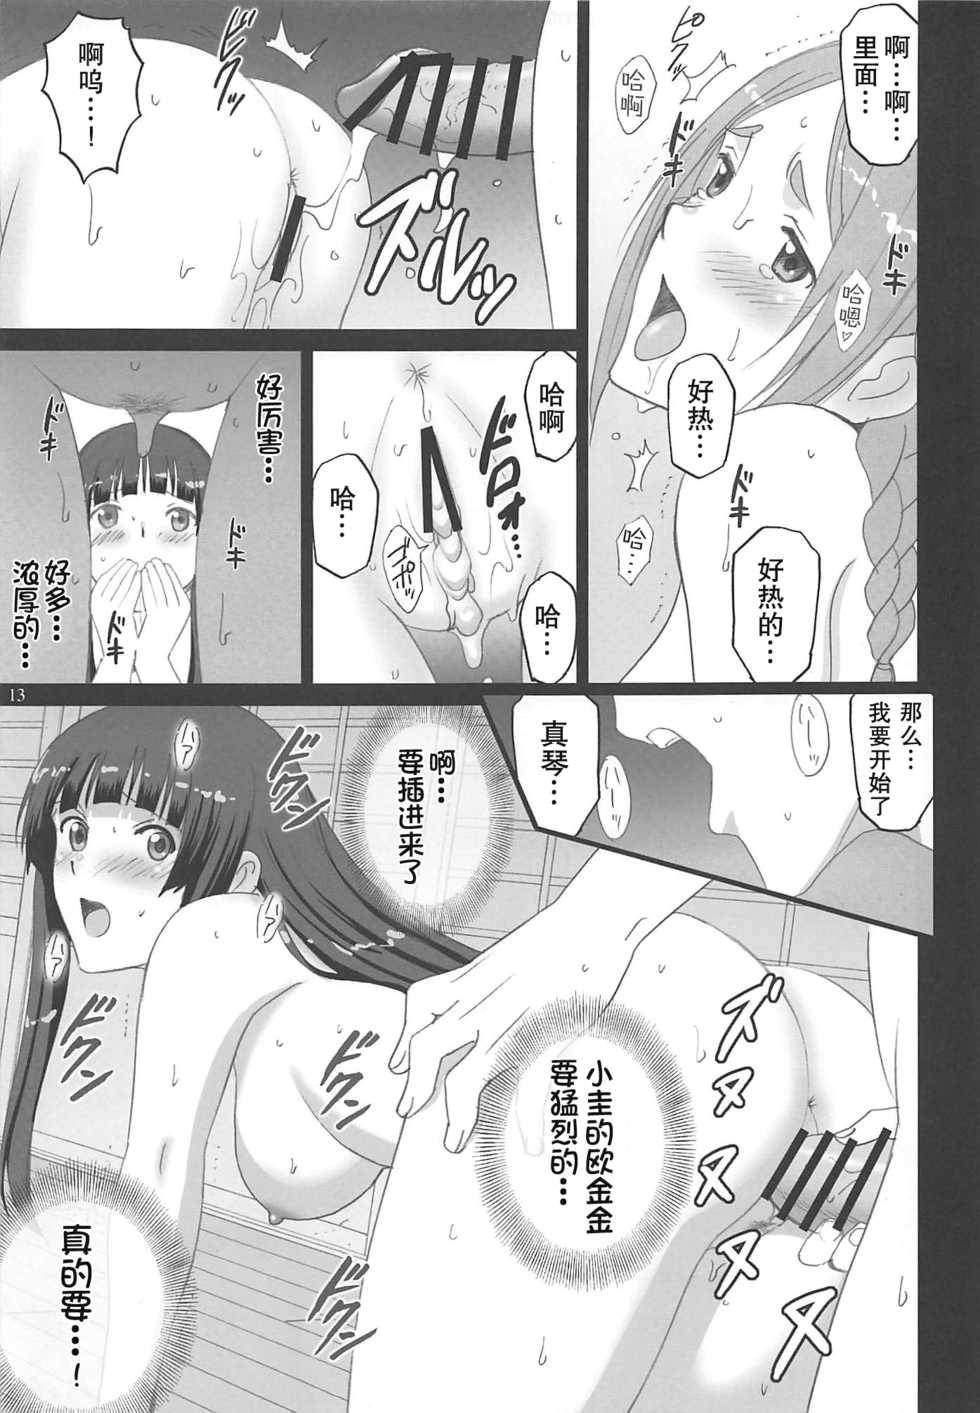 [ACTIVA (SMAC)] Fellaing Witch (Flying Witch) [Chinese] [2016-08-28] - Page 13